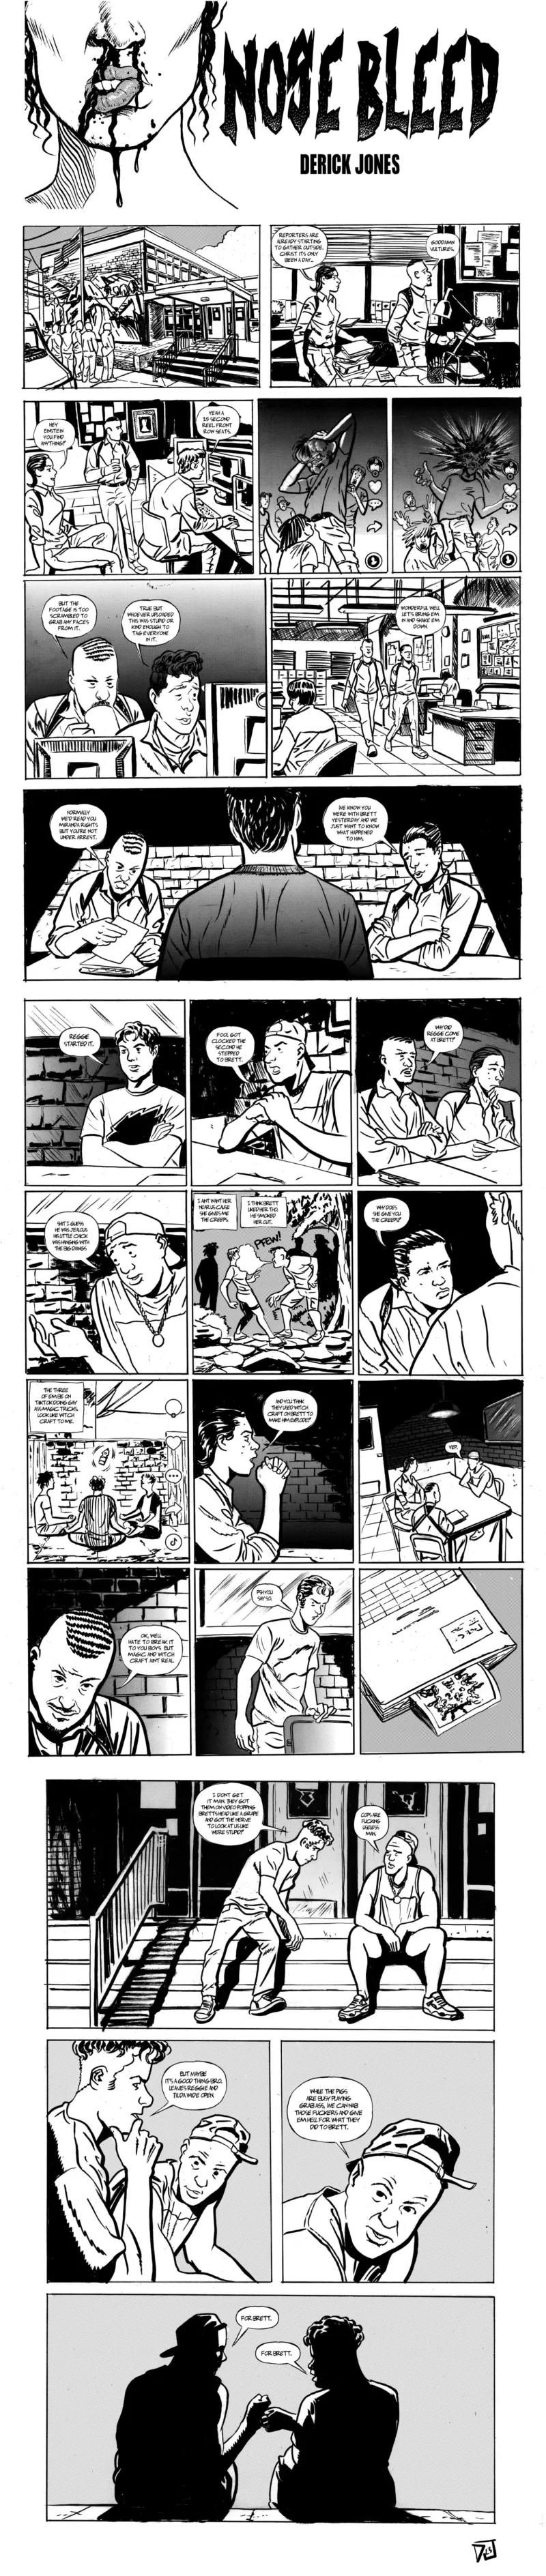 A 24-panel black-and-white comic by Derick Jones titled "Nose Bleed" In the first panel a police building is shown with reporters standing on the outside. The next panel to the right, shows the detectives in their office, the female detective on the left says, "Reporters are already starting to gather outside. Christ its only been a day..." The male detective responds, "Goddamn vultures." The second left hand panel shows the two detectives and a man on a computer in the office. The female detective asks, "Hey Einstein you find anything?" The man on the computer responds, "Yeah a 15 second reel front row seats." The next right panel is split in two showing a TikTok of a man grasping his bulging head as others around look in fear. The second half of the split panel shows the moment the man's head bursts with fear striking the viewers. The following left panel shows the detective and computer user, the detective sips his coffee and utters, "But the footage is too scrambled to grab any faces from it." The other man responds, "True but whoever uploaded this was stupid or kind enough to tag everyone in it." In the next right panel the two detectives walk through the precinct, the female detective says, "Wonderful well let's bring em in and shake am down." The following panel spans the width of the page and shows the two detectives interrogating a man. The male detective on the right starts, "Normally we'd read you Miranda rights but you're not under arrest." The female cop follows, "We know you were with Brett yesterday and we just want to know what happened to him." The next row of panels is split into three across the page for four rows. In the left panel the man being interrogated responds, "Regge started it." The middle panel shows a man in a backwards cap and cutoff shirt saying, "Fool got clocked the second he stepped to Brett." The right panel shows the detectives, with the male asking, "Why did Regge come at Brett?" The second row left panel shows the same man questioning himself saying, "Shit I guess he was jealous his little chick was hanging with the big dawgs." The middle panel shows a man blowing smoke on a woman "Pfew!" in a creek bed in the forest. The man being interrogated continues, "I aint want her near us cause she gives me the creeps." "I think Brett liked her tho. He smoked her out." The second row right panel shows the female detective sternly questioning, "Why does she give you the creeps?" The third row left panel shows three men sitting in a circle hands knees in a TikTok video, the man responds to the detective, "The three of em be on TikTok doing gay ass magic tricks look like witchcraft to me." The third row middle panel shows the female detective with her hands clasped in front of her face saying, "And you think they used witchcraft on Brett to make him explode?" The third row right panel shows the detectives and the man being interrogated, he responds, "Yep." The fourth row left panel begins with the male detective responding to the man, "Ok, well hate to break it to you boys but magic and witchcraft aint real." In the middle panel a man with short hair and an angered face gets up to leave and responds to the detective, "Psh you say so." The final right panel of the block shows the case file with a polaroid of Brett's exploded head. The two boys being interrogated meet outside. The panel spans the width of the page. The boy with short hair begins to sit next to the man with the cap outside the station. The short haired boy says, "I don't get it man. They got them on video popping Brett's head like a grape and got the nerve to look at us like we're stupid?" The man in the cap responds, "Cops are fucking useless man." The following panel is half the width of the page, the short haired boy continues as the capped man listens, "But maybe it's a good thing bro. Leaves Reggie and Tilda wide open." In the right half panel the man in the cap is shown saying, "While the pigs are busy playing grab ass, we can nab those fuckers and give em hell for what they did to Brett. The final panel spans the page and shows the silhouette of the two men, the capped on the left and short hair on the right. They fist bump and say "For Brett."